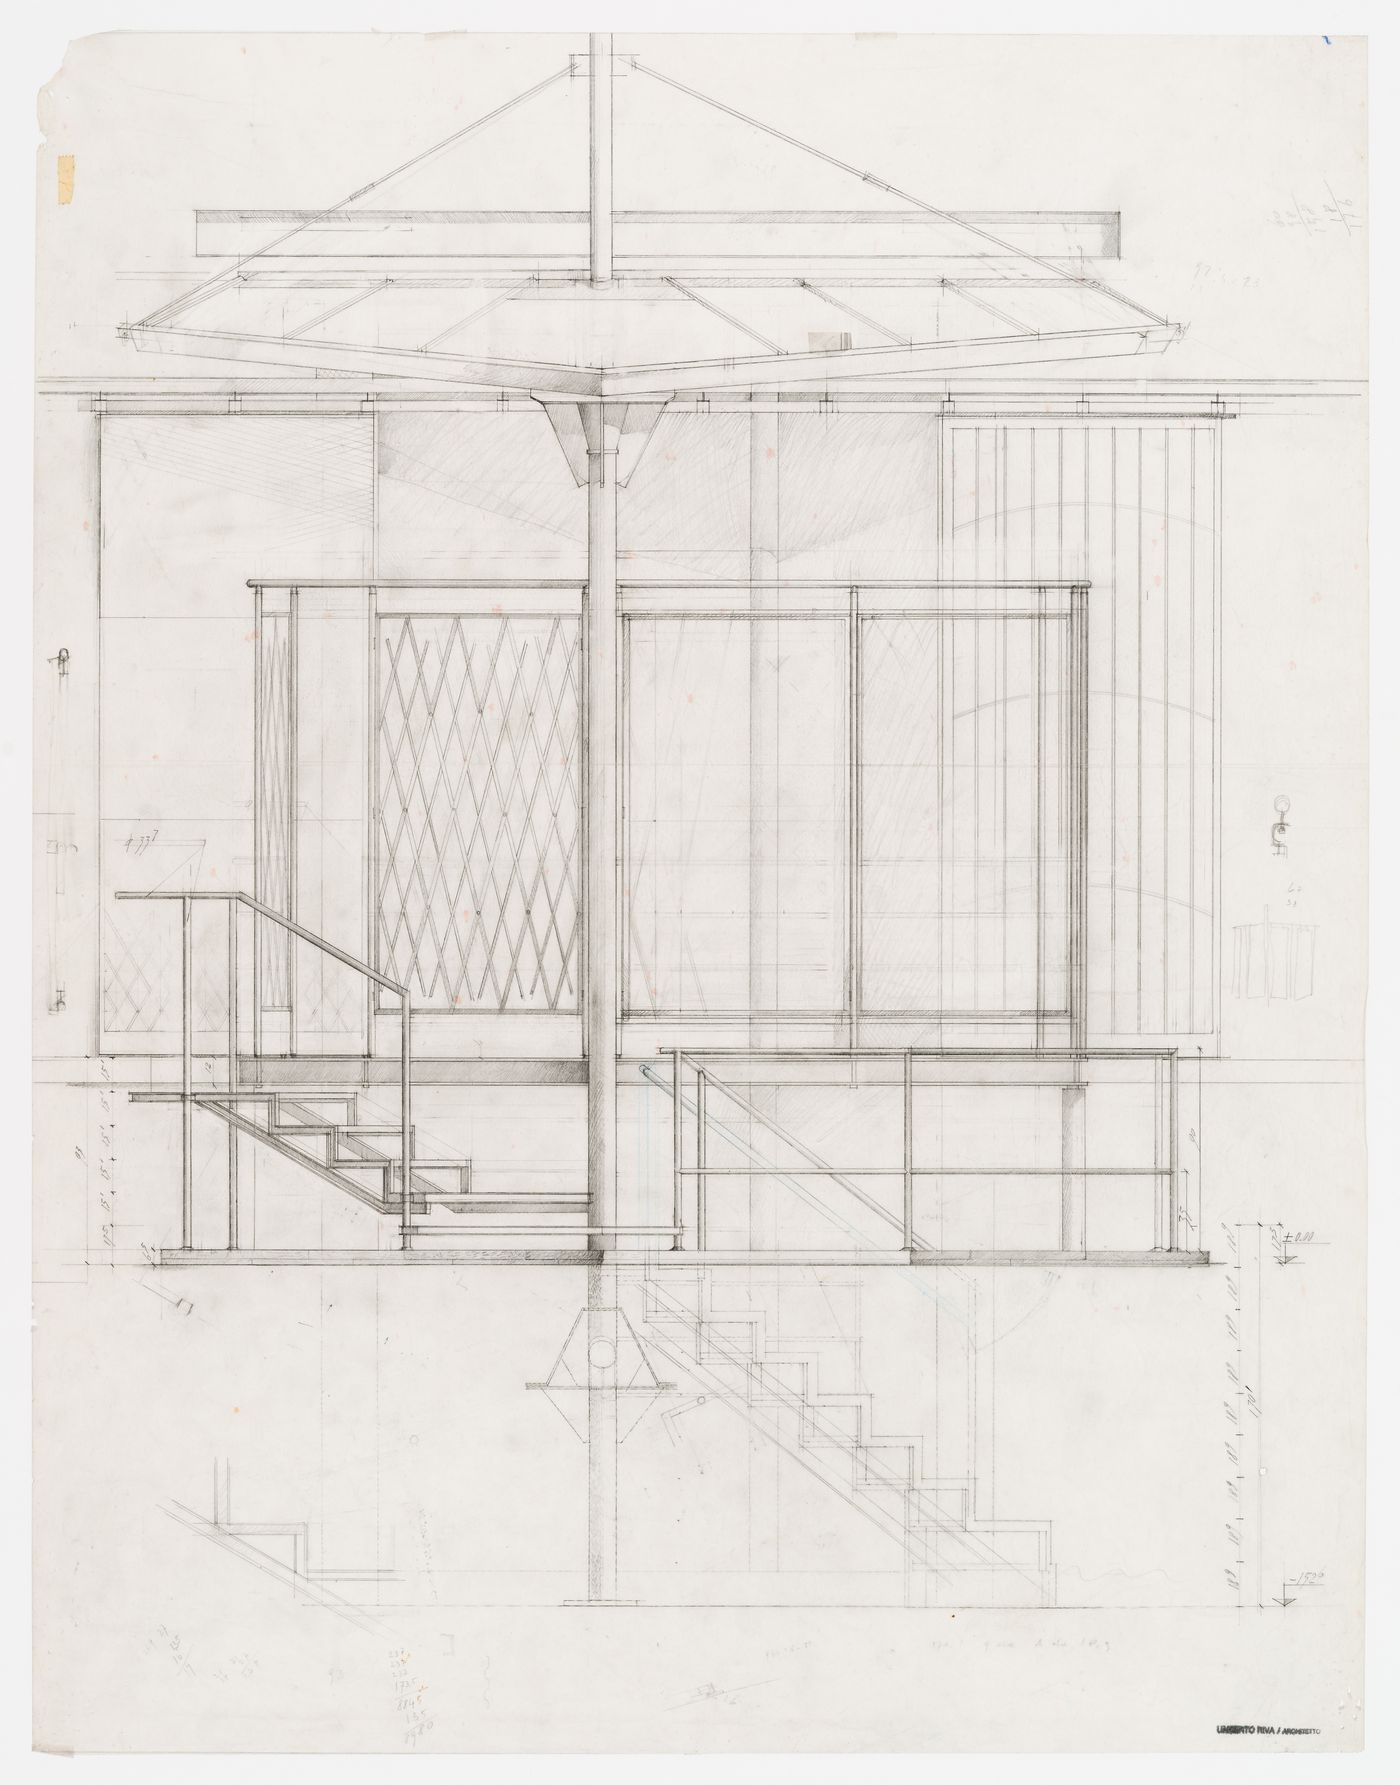 Elevation of the loggia in the garden for Casa Frea, Milan, Italy